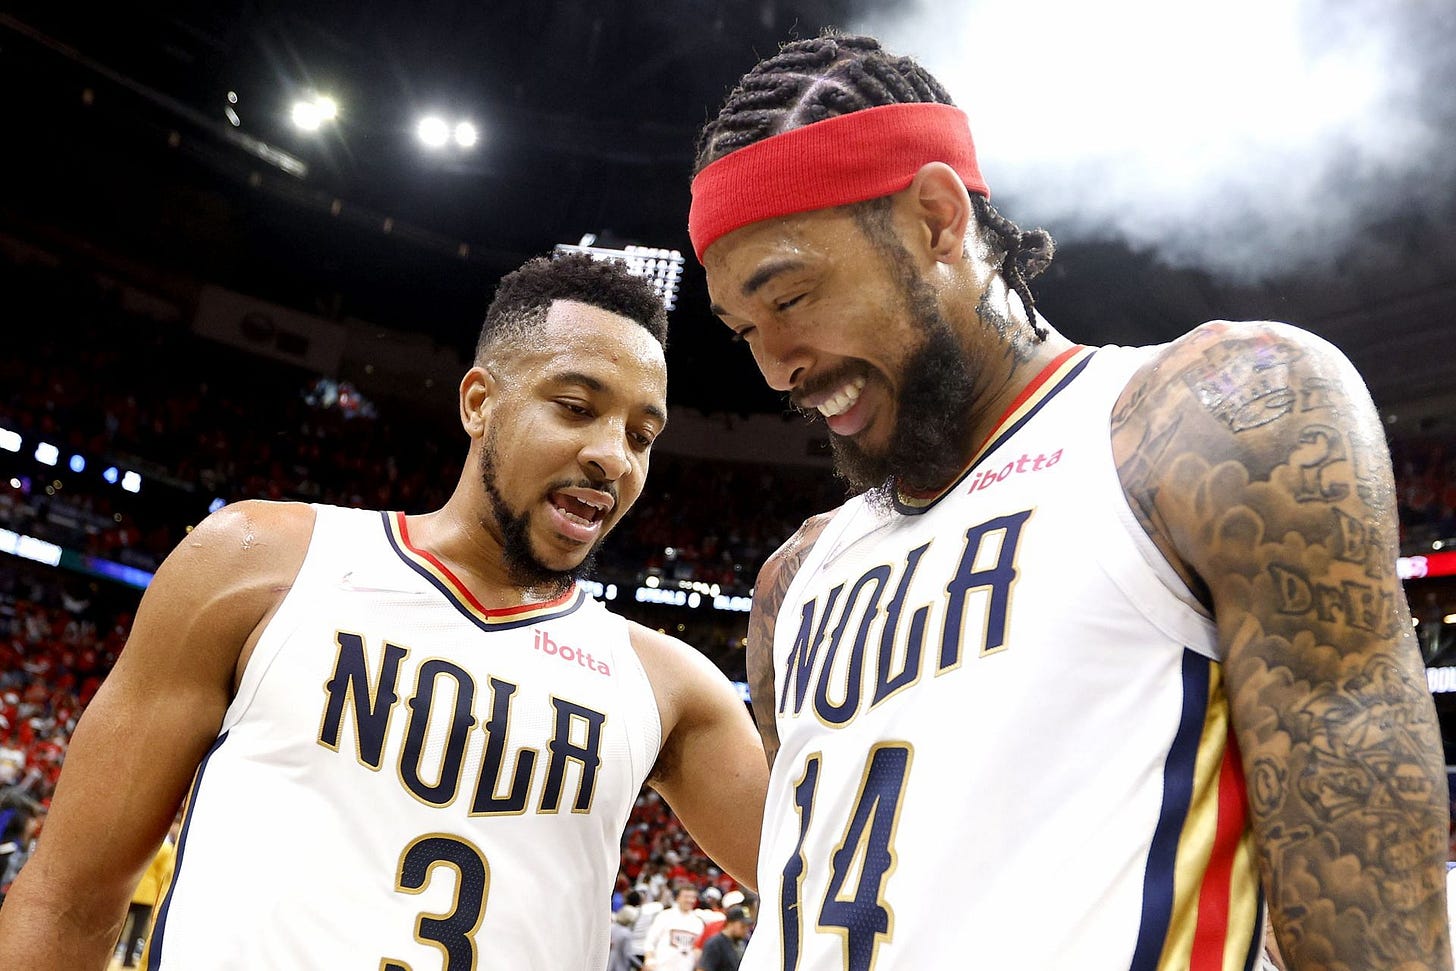 Know you are holding title-contention for the Pelicans in your hands" -  Stephen A. Smith on injury-plagued former All-Star, also calls Brandon  Ingram a star after Pelicans succumb to Phoenix Suns